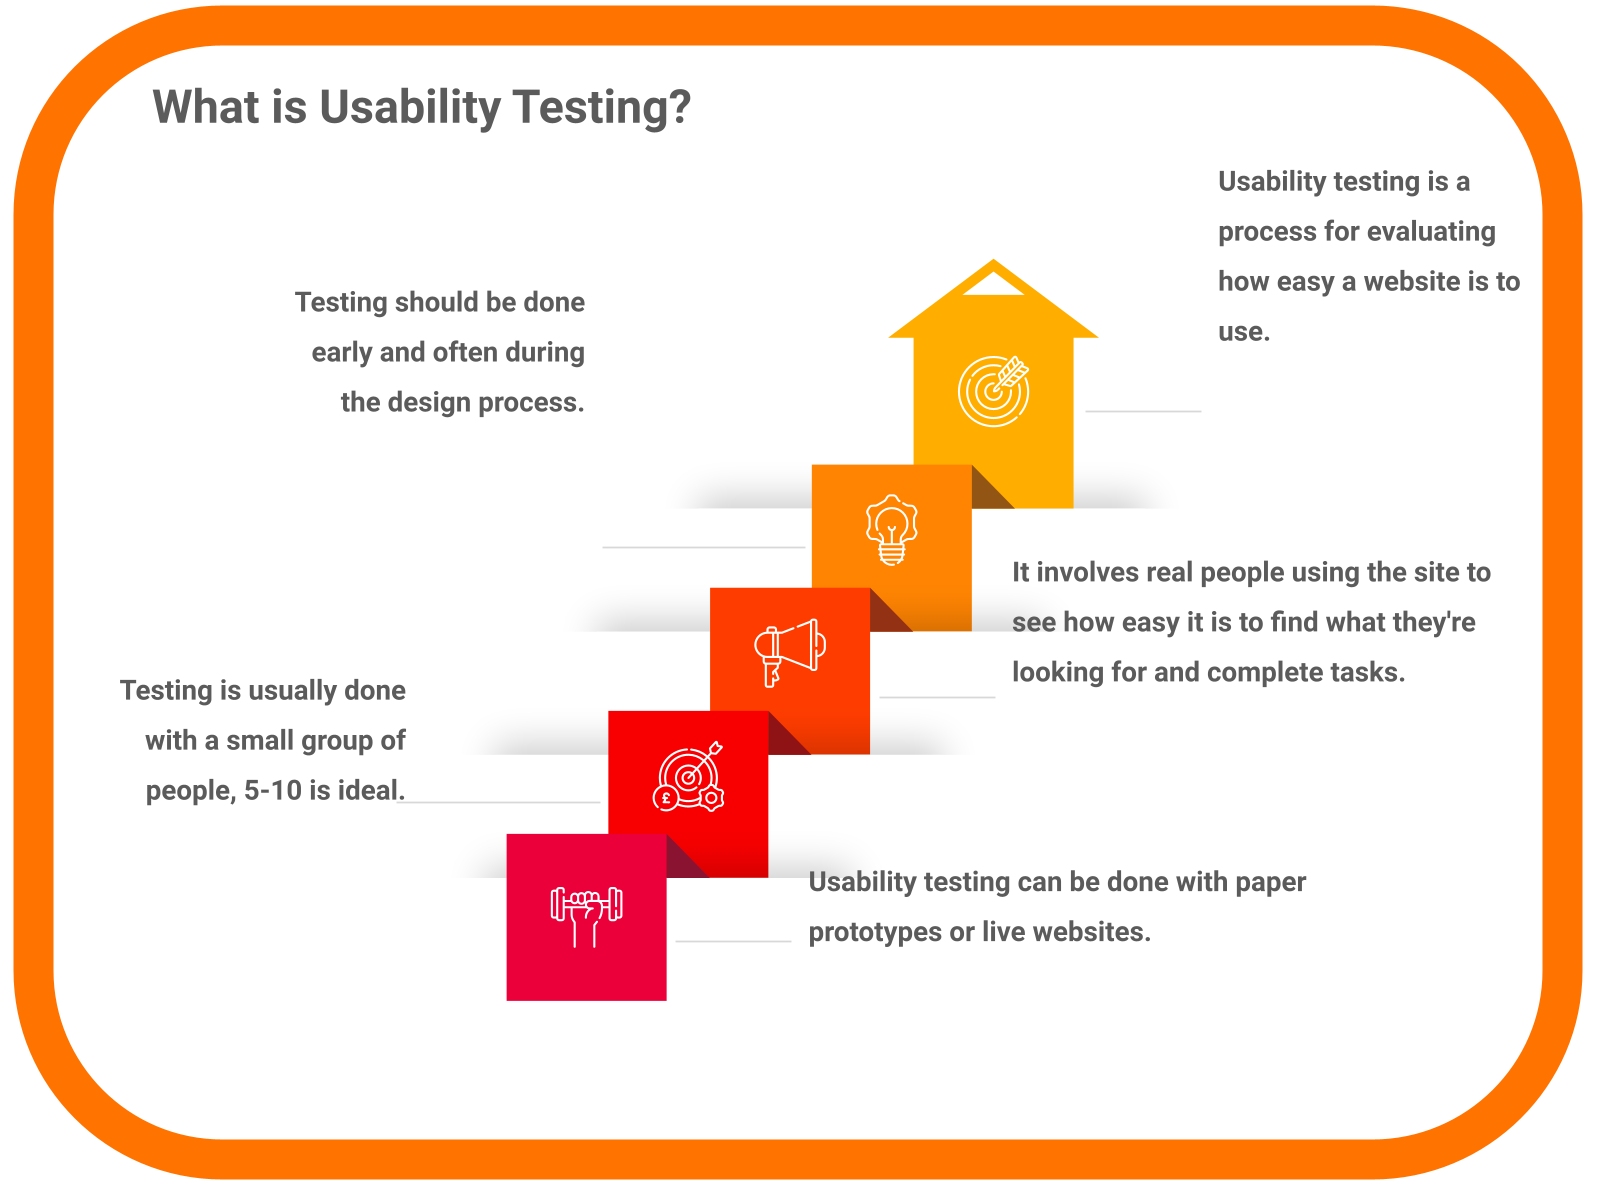 What is Usability Testing?